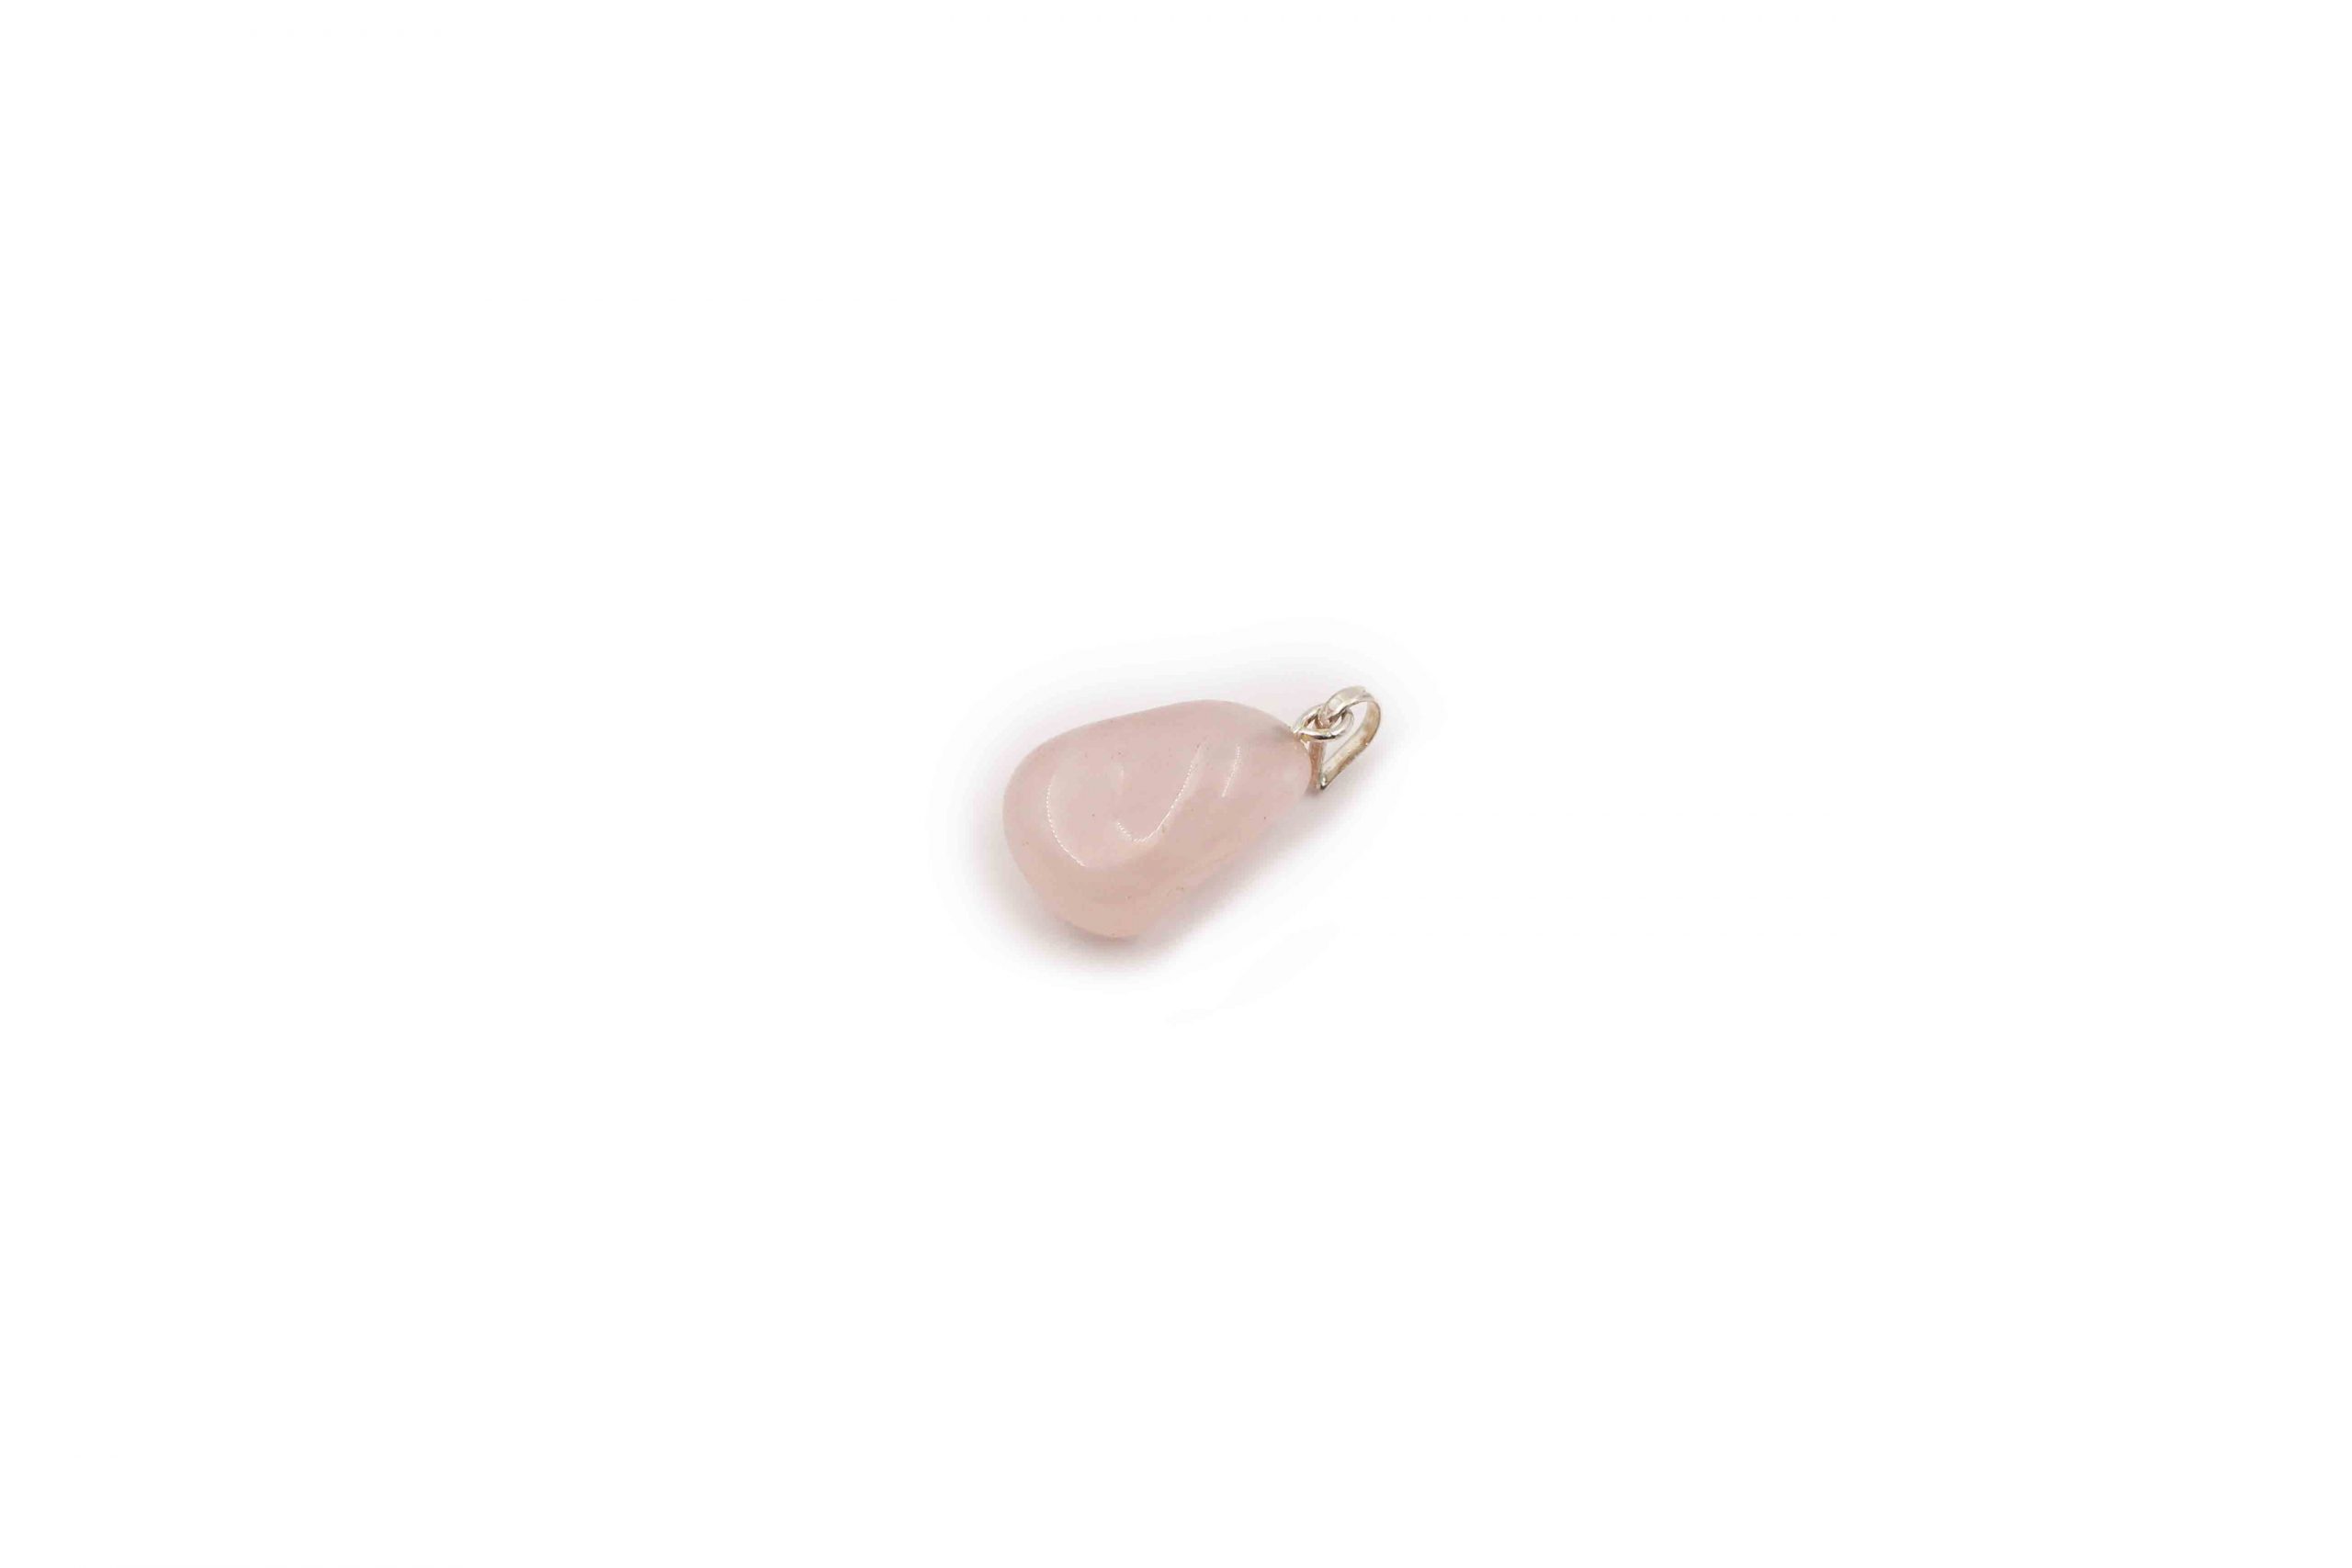 Rose Quartz Tumbled Pendant in Sterling Silver - Crystal Dreams